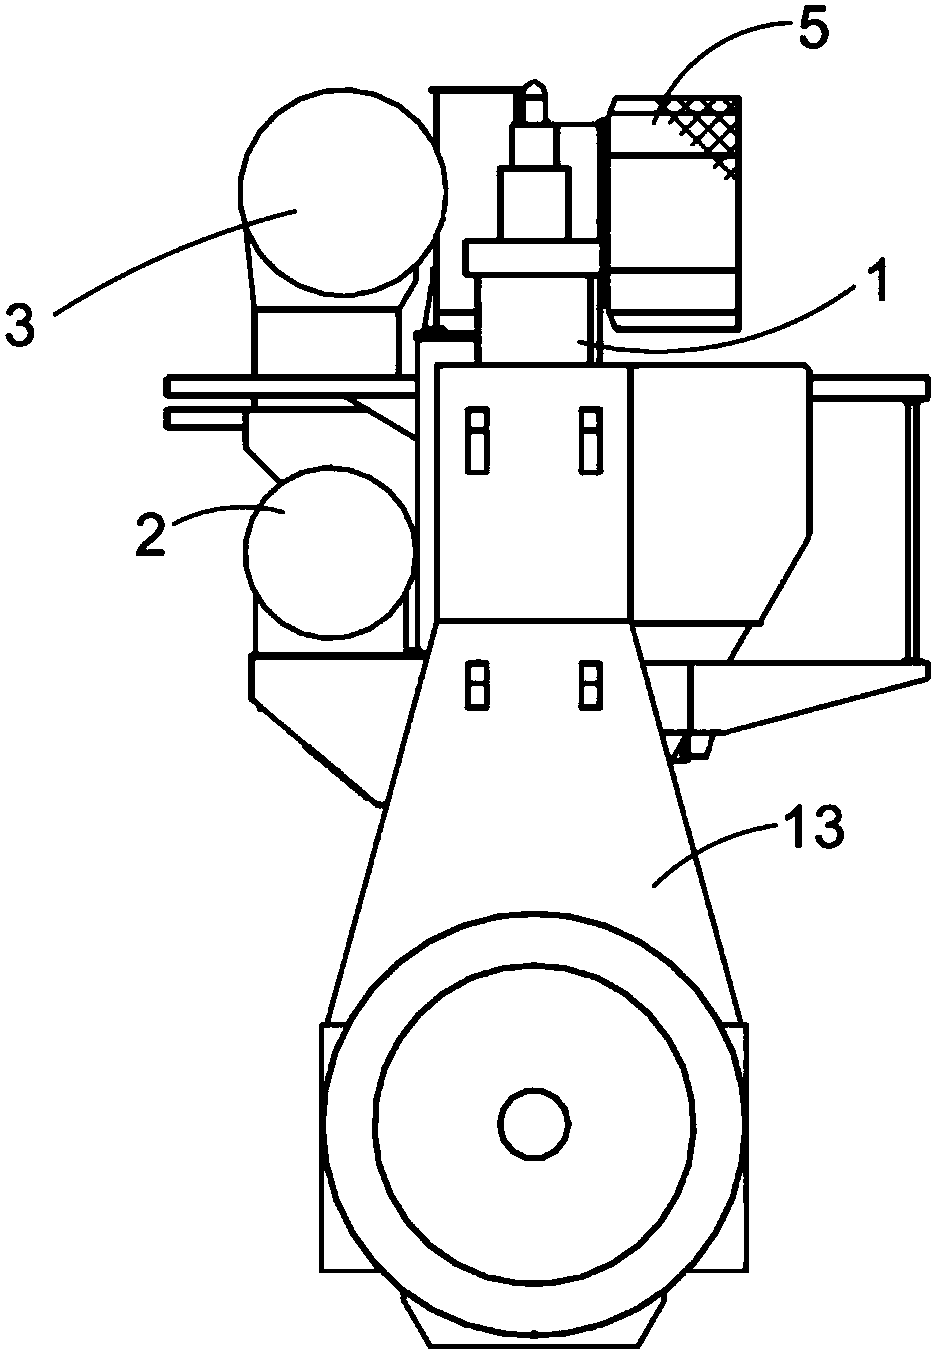 Fuel valve for injecting fuel into the combustion chamber of an internal combustion engine